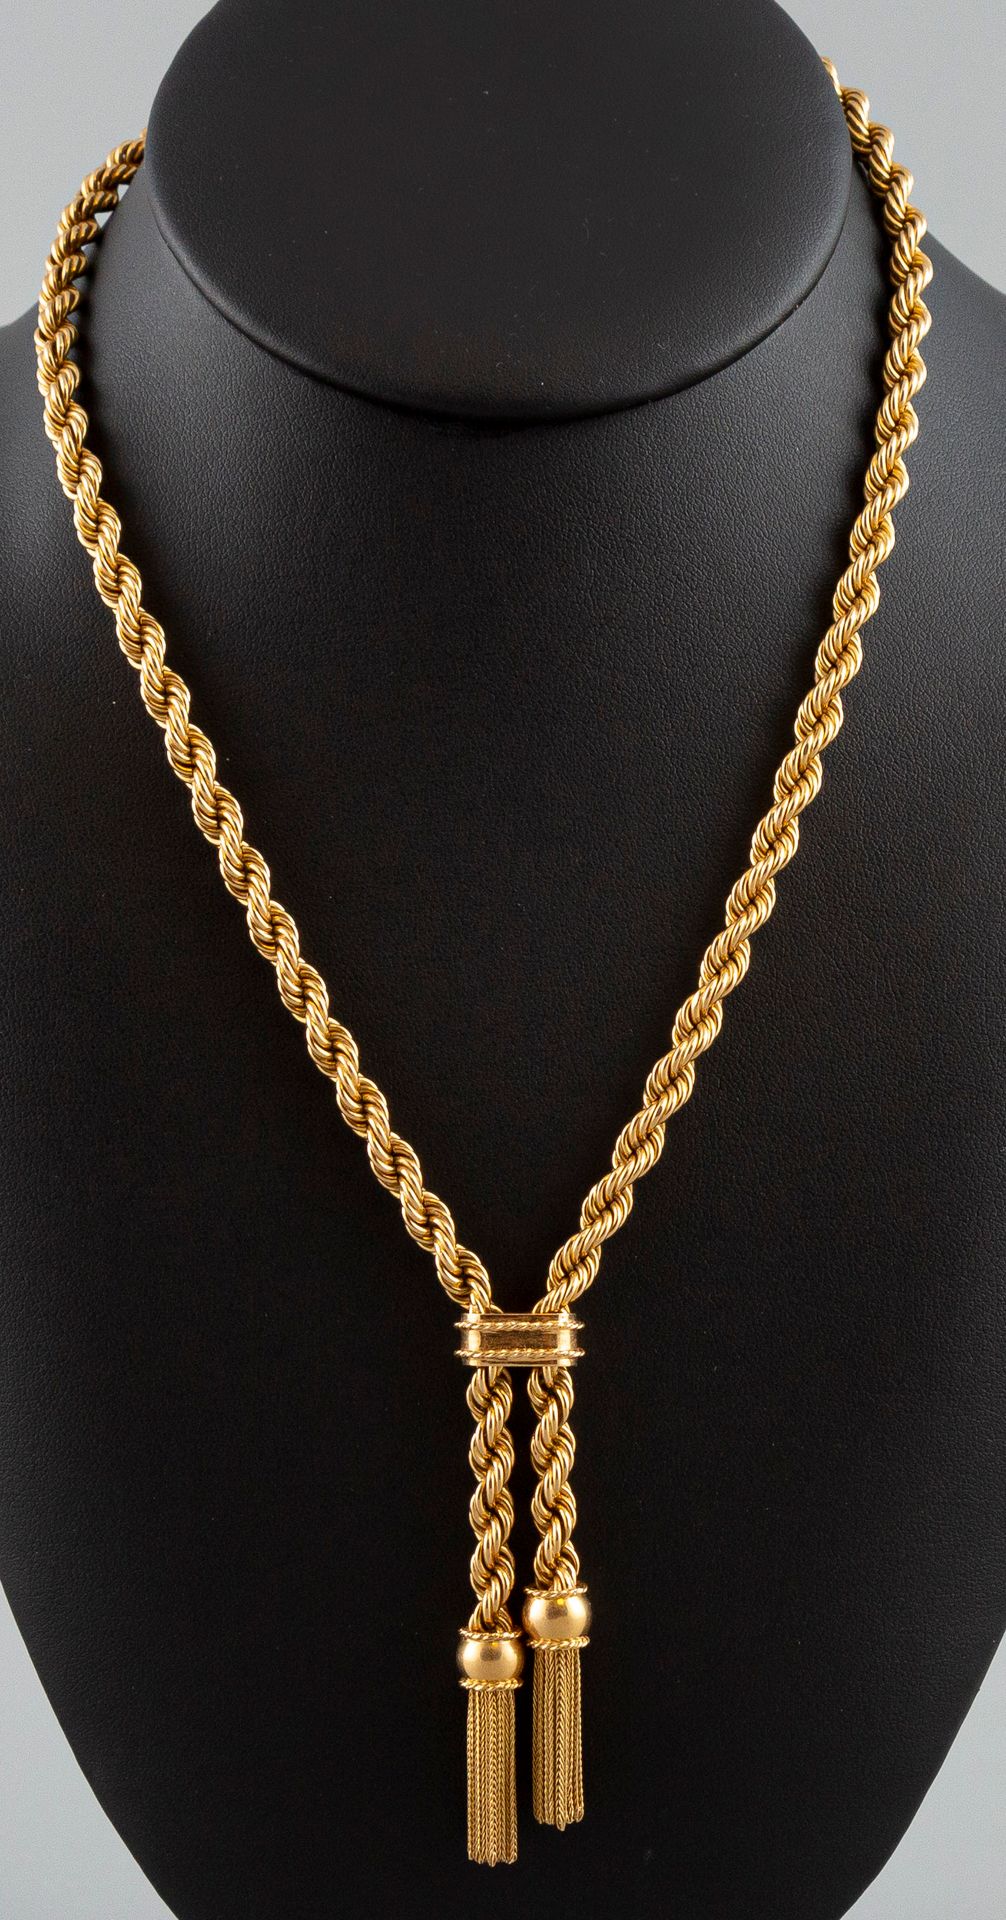 Null Necklace with tassels in 18K yellow gold 750°. Weight 30,6g.